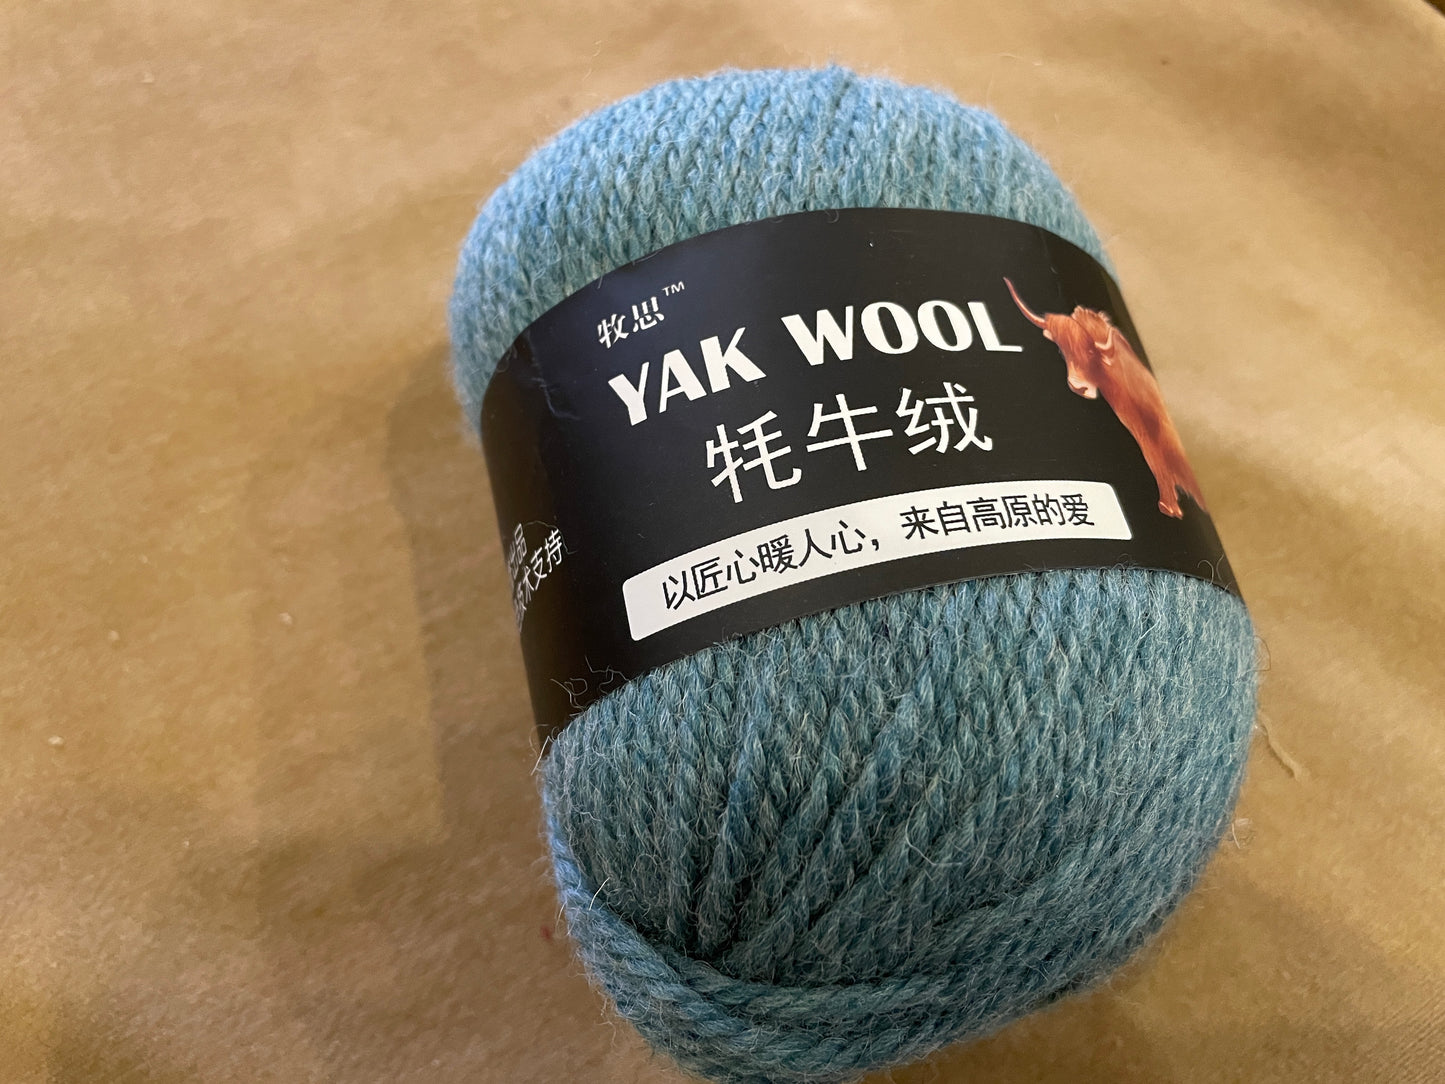 Yak Wool Blend - DK Weight - Four Colors